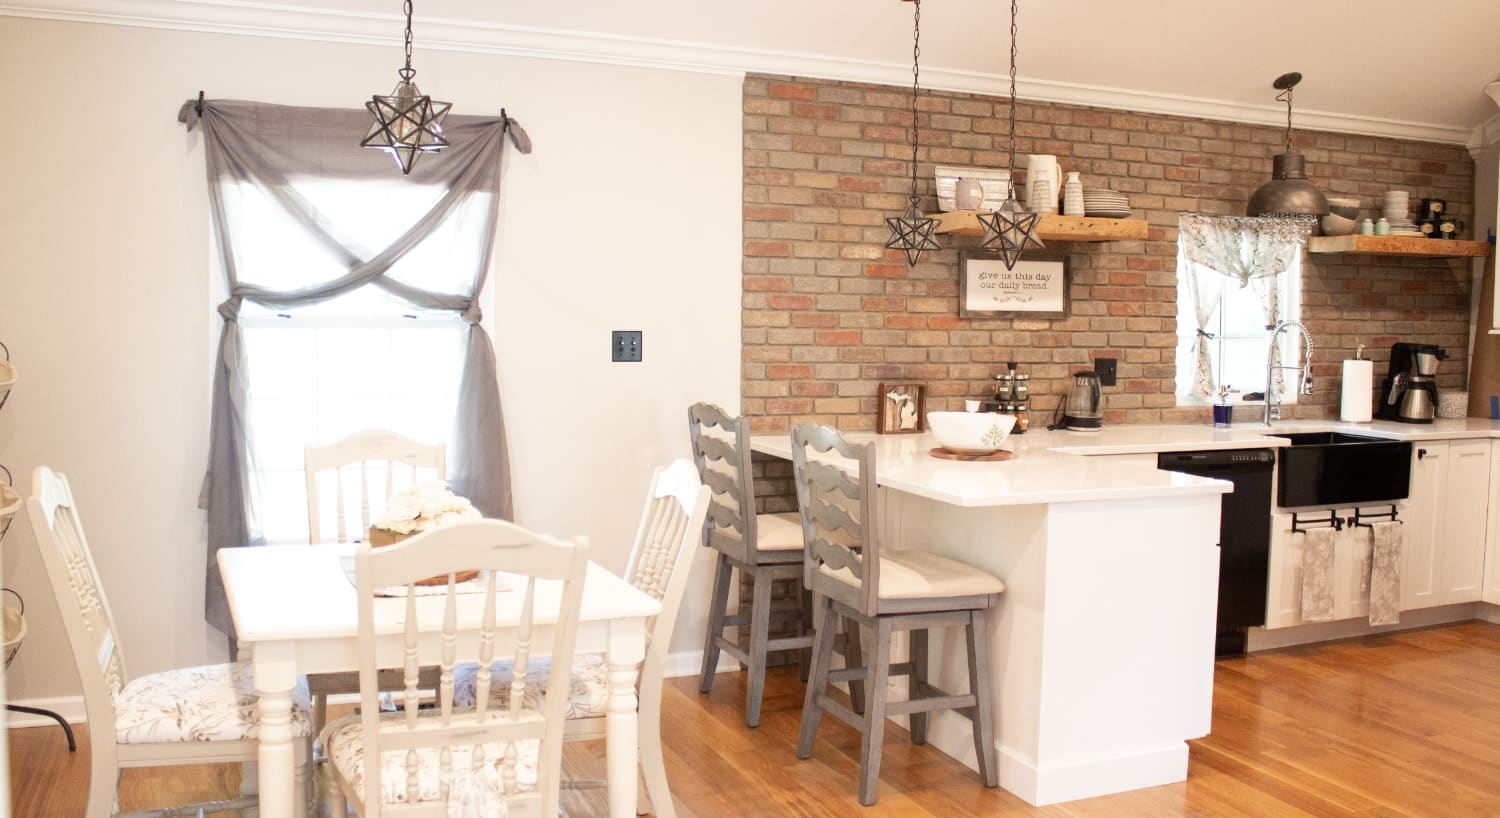 Kitchen and dining area with white walls, a brick accent wall, hardwood flooring, white cabinets, black appliances, and hanging star shaped lights